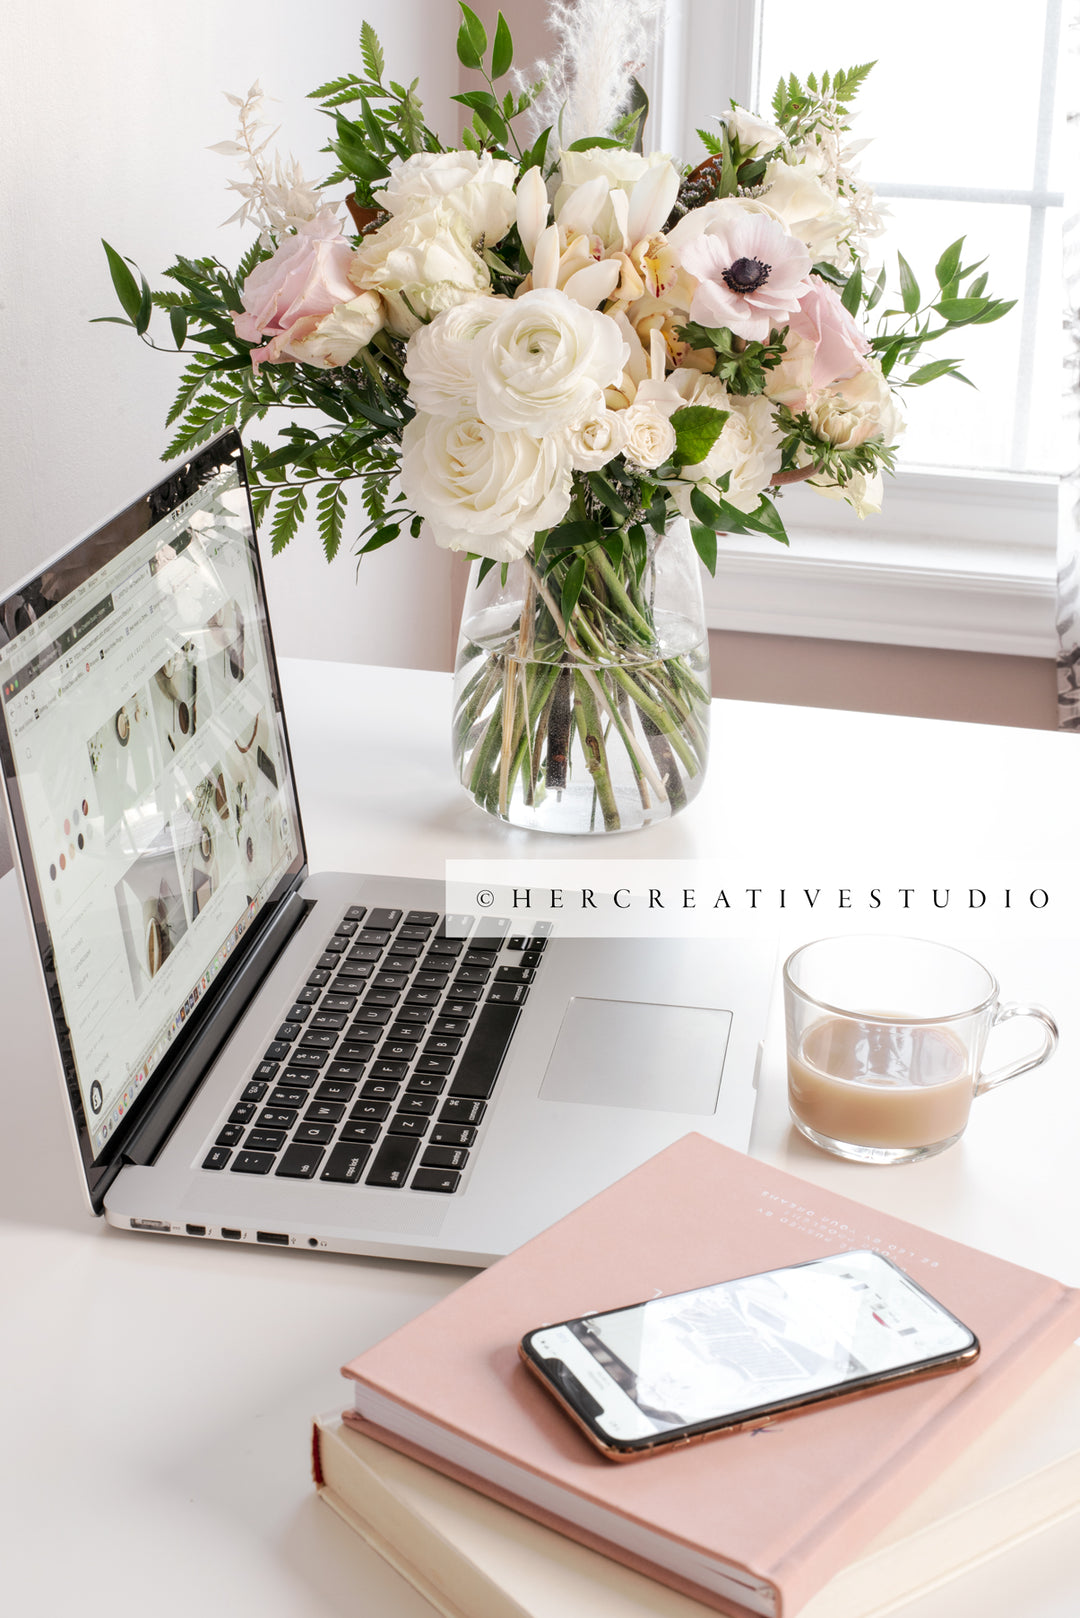 Coffee, Flowers & Laptop on Pretty Workspace, Styled Stock Image